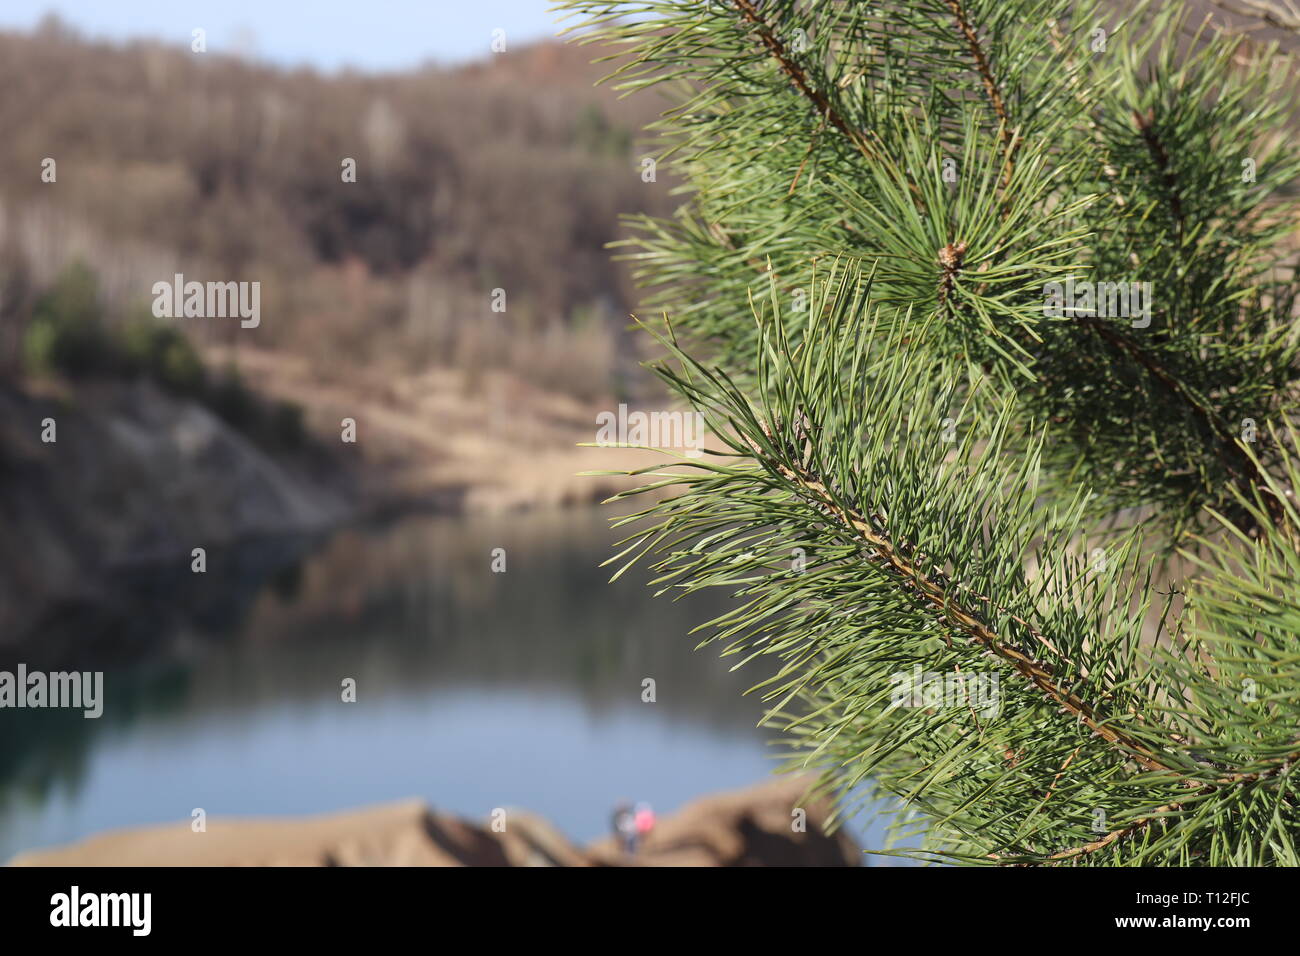 Pine tree in front, lake and rocks in background. Stock Photo